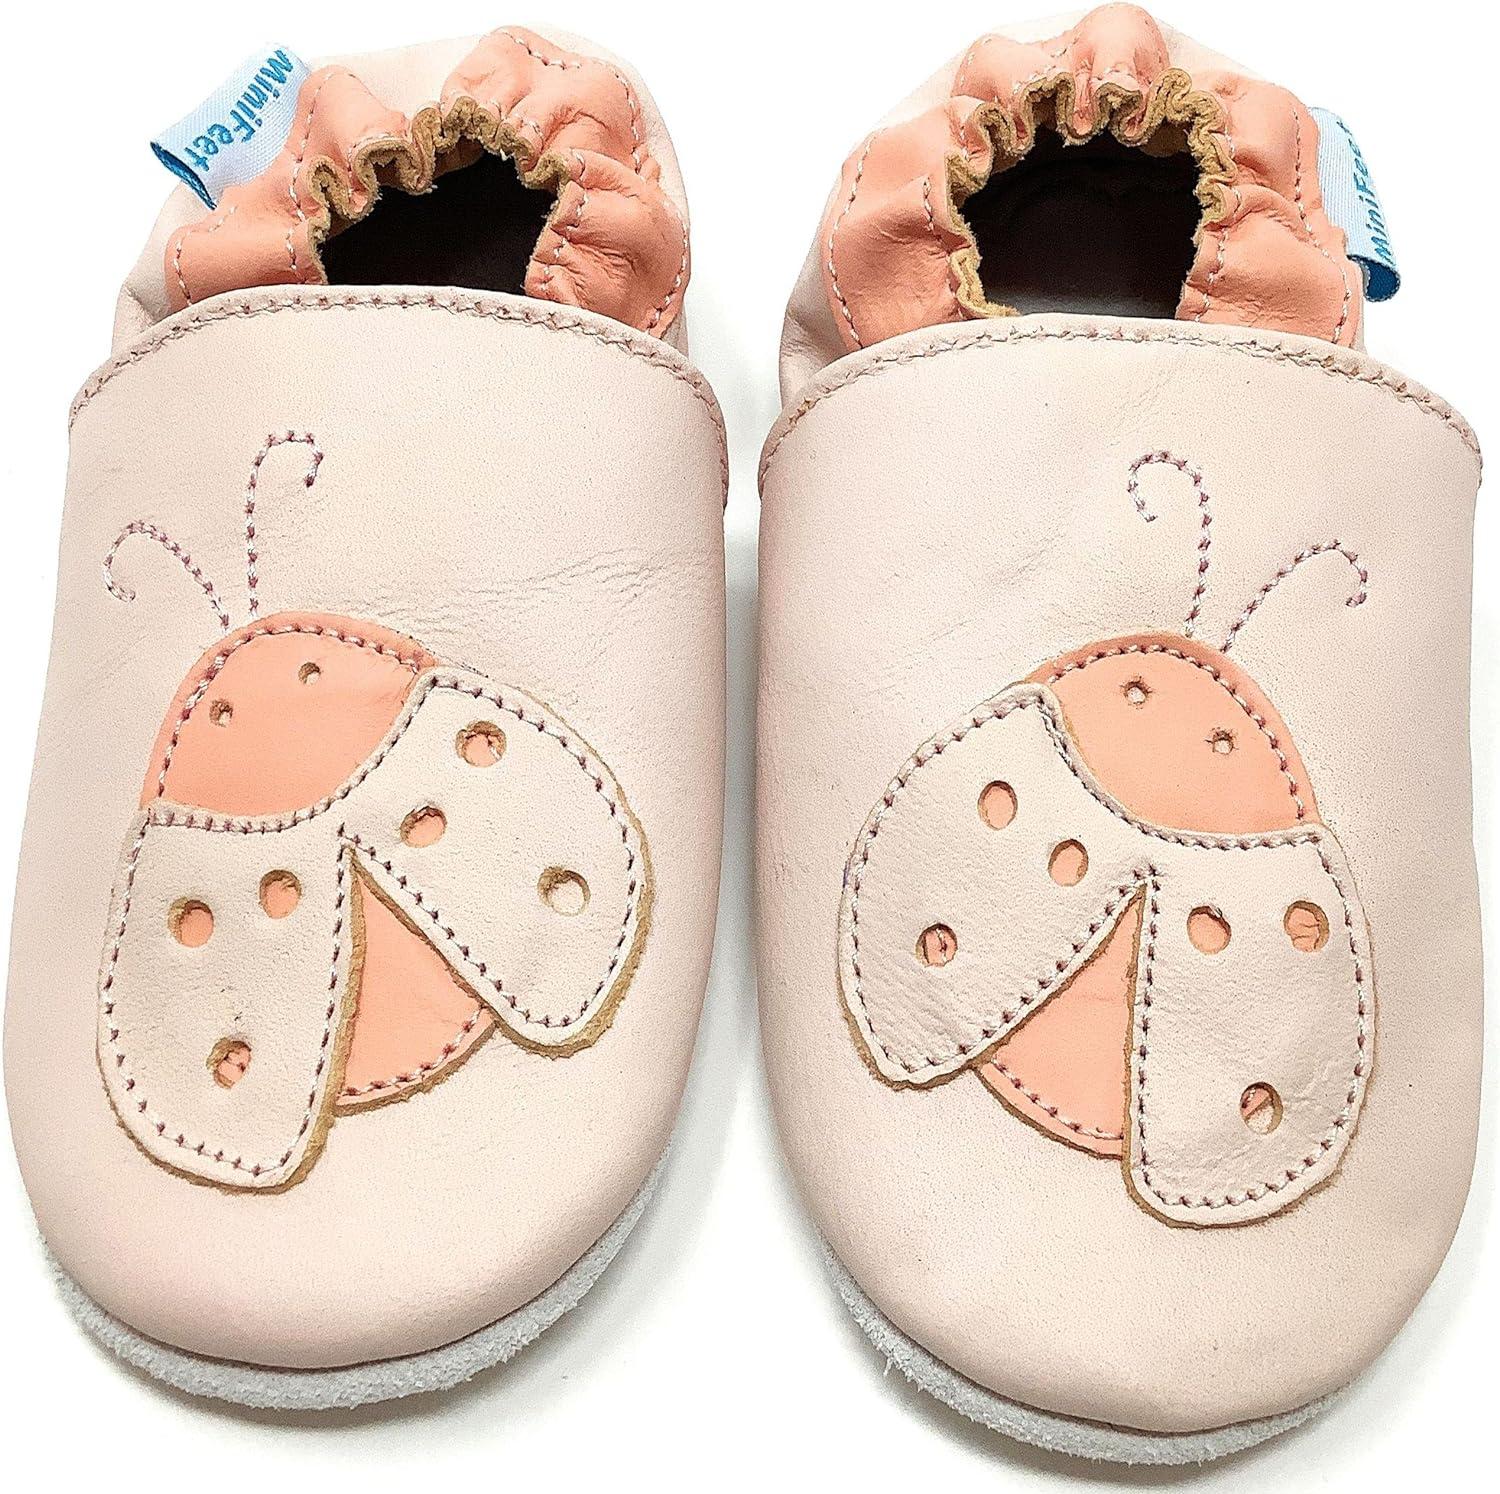 Soft Leather Baby Shoes - Minifeet - Soft Leather Baby Shoes